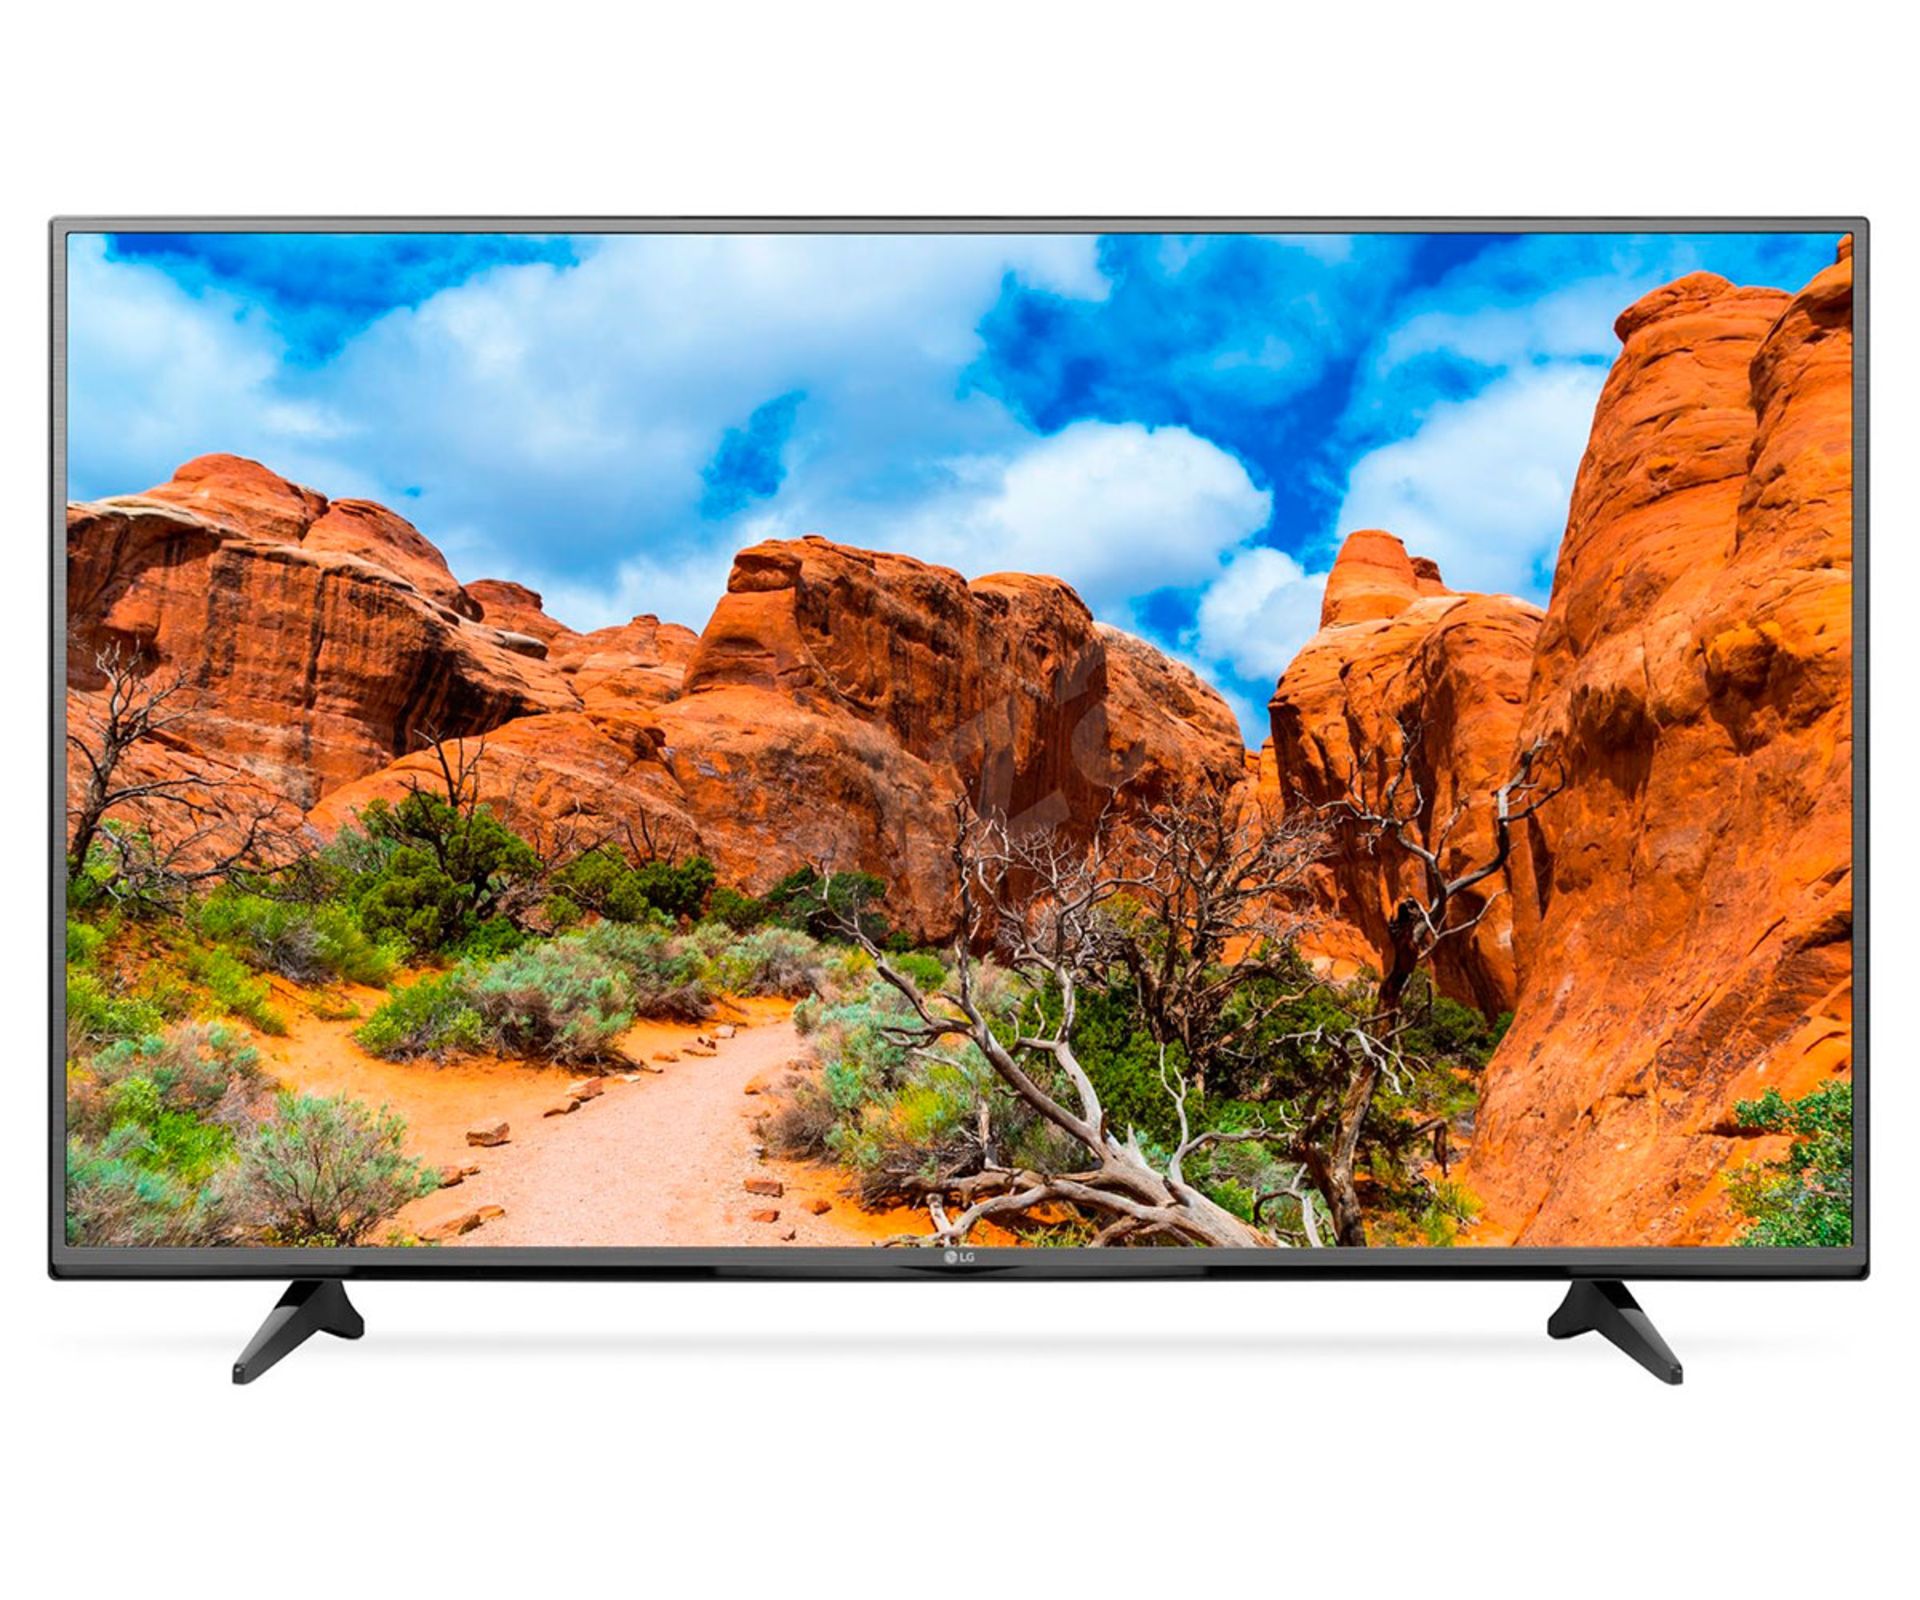 V Grade A LG 49" 4K ULTRA HD SMART LED TV WITH FREEVIEW HD & WEBOS 2.0 49UF6407 - Item Available